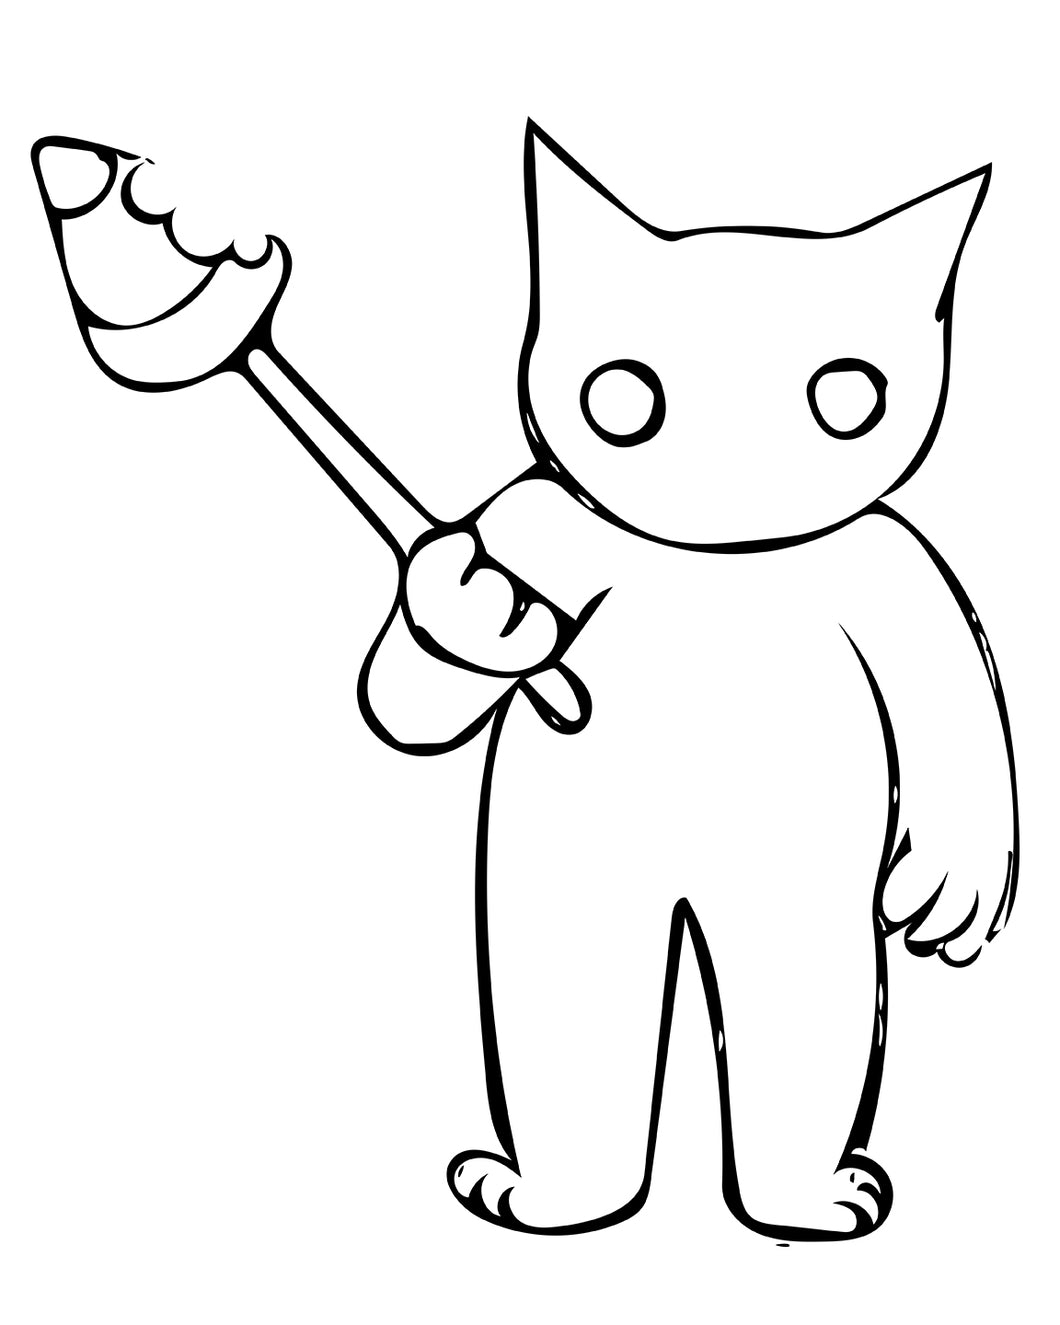 Free to download Coloring page of cute spooky Halloween Cat